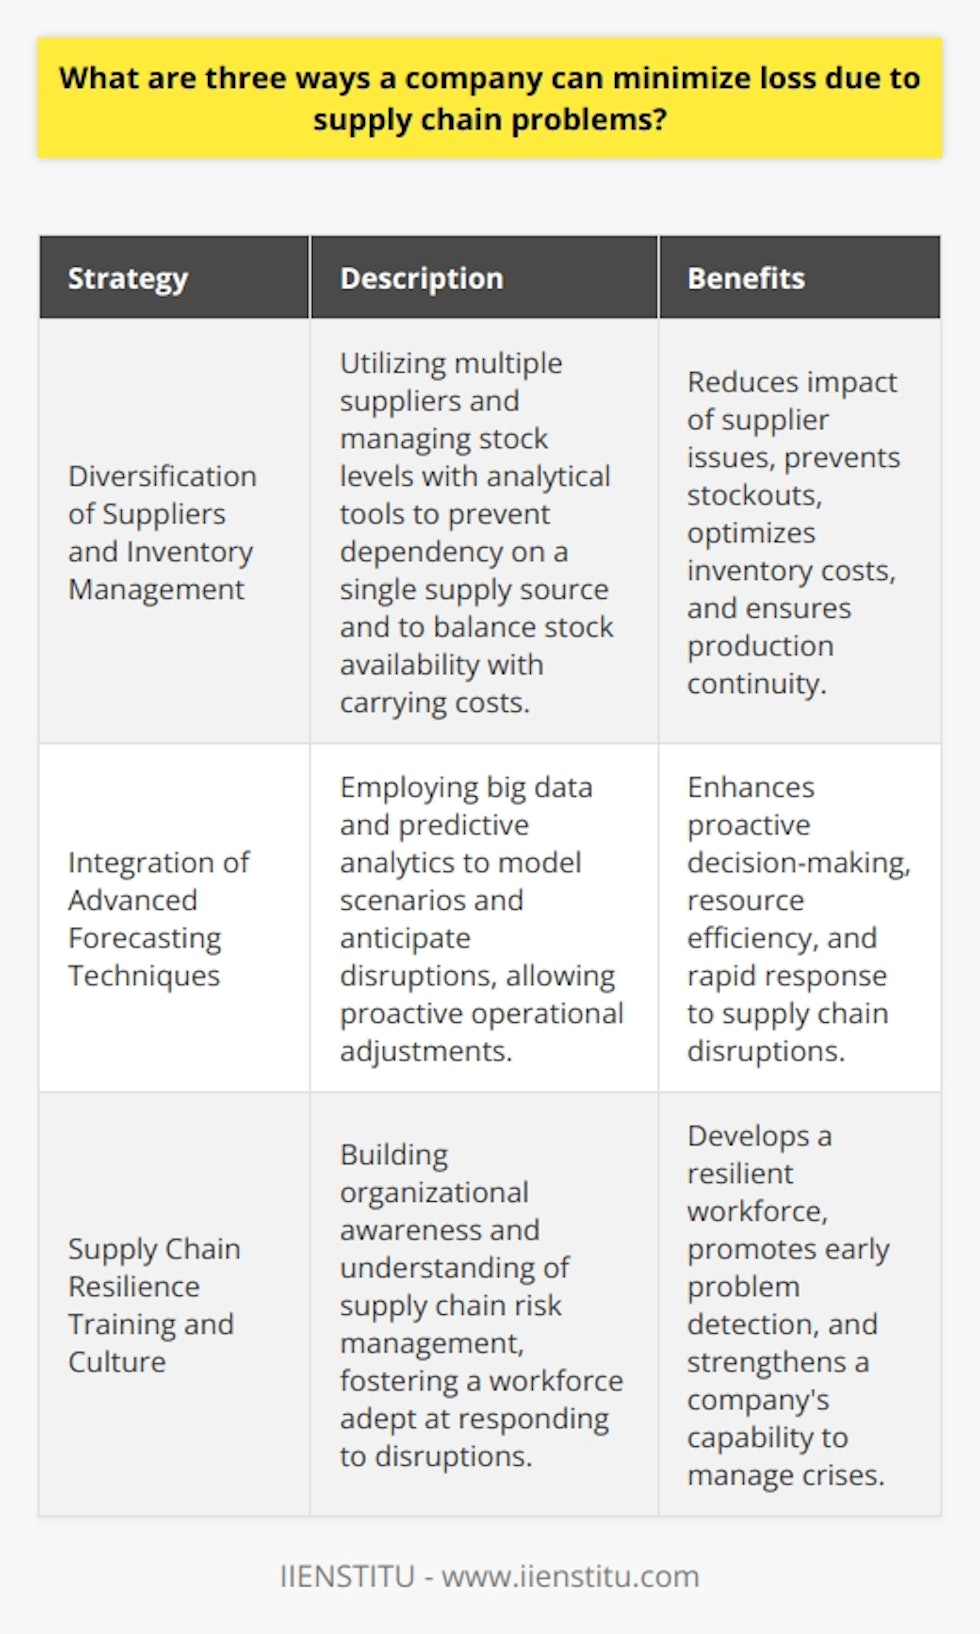 Supply chain problems can significantly impact the operational efficiency and profitability of businesses. To mitigate these challenges and minimize losses, companies can employ the following strategies:**Diversification of Suppliers and Inventory Management**One effective strategy to minimize the risk of supply chain disruptions is diversification of suppliers. By not relying on a single source, a company can reduce the impact of any one supplier facing issues such as production problems, financial difficulties, or geopolitical tensions. Moreover, strategic inventory management, including maintaining safety stocks and buffer inventory, can prevent stockouts and production delays. Sophisticated analytics tools can aid in determining optimal stock levels to balance carrying costs with the need for responsiveness to supply chain volatility.**Integration of Advanced Forecasting Techniques**Advanced forecasting techniques leveraging big data and predictive analytics can enable a company to anticipate potential supply chain disruptions. By modeling various scenarios and their impacts, businesses can proactively adjust their operations and supply chain strategies. This forward-thinking approach allows companies to deploy resources more efficiently and pivot quickly in response to imminent supply chain issues, such as supplier bankruptcies or natural disasters impacting logistics networks.**Supply Chain Resilience Training and Culture**A less frequently discussed but crucial aspect is building a culture of resilience within the organization. This includes training employees across various departments to understand the intricacies of the supply chain and to think in terms of risk mitigation and contingency planning. A company that places an emphasis on supply chain education fosters a workforce that is better equipped to recognize warning signs and take appropriate actions before small problems become crises.These three strategies, when implemented effectively, can not only minimize losses due to supply chain problems but also contribute to a strategic advantage in the marketplace. By focusing on risk management, predictive analytics, and a culture of supply chain resilience, companies can better navigate the complexities of modern supply networks. This approach requires a blend of strategic planning, technology adoption, and workforce development to ensure a responsive and adaptable supply chain capable of withstanding disruptions and maintaining business continuity.